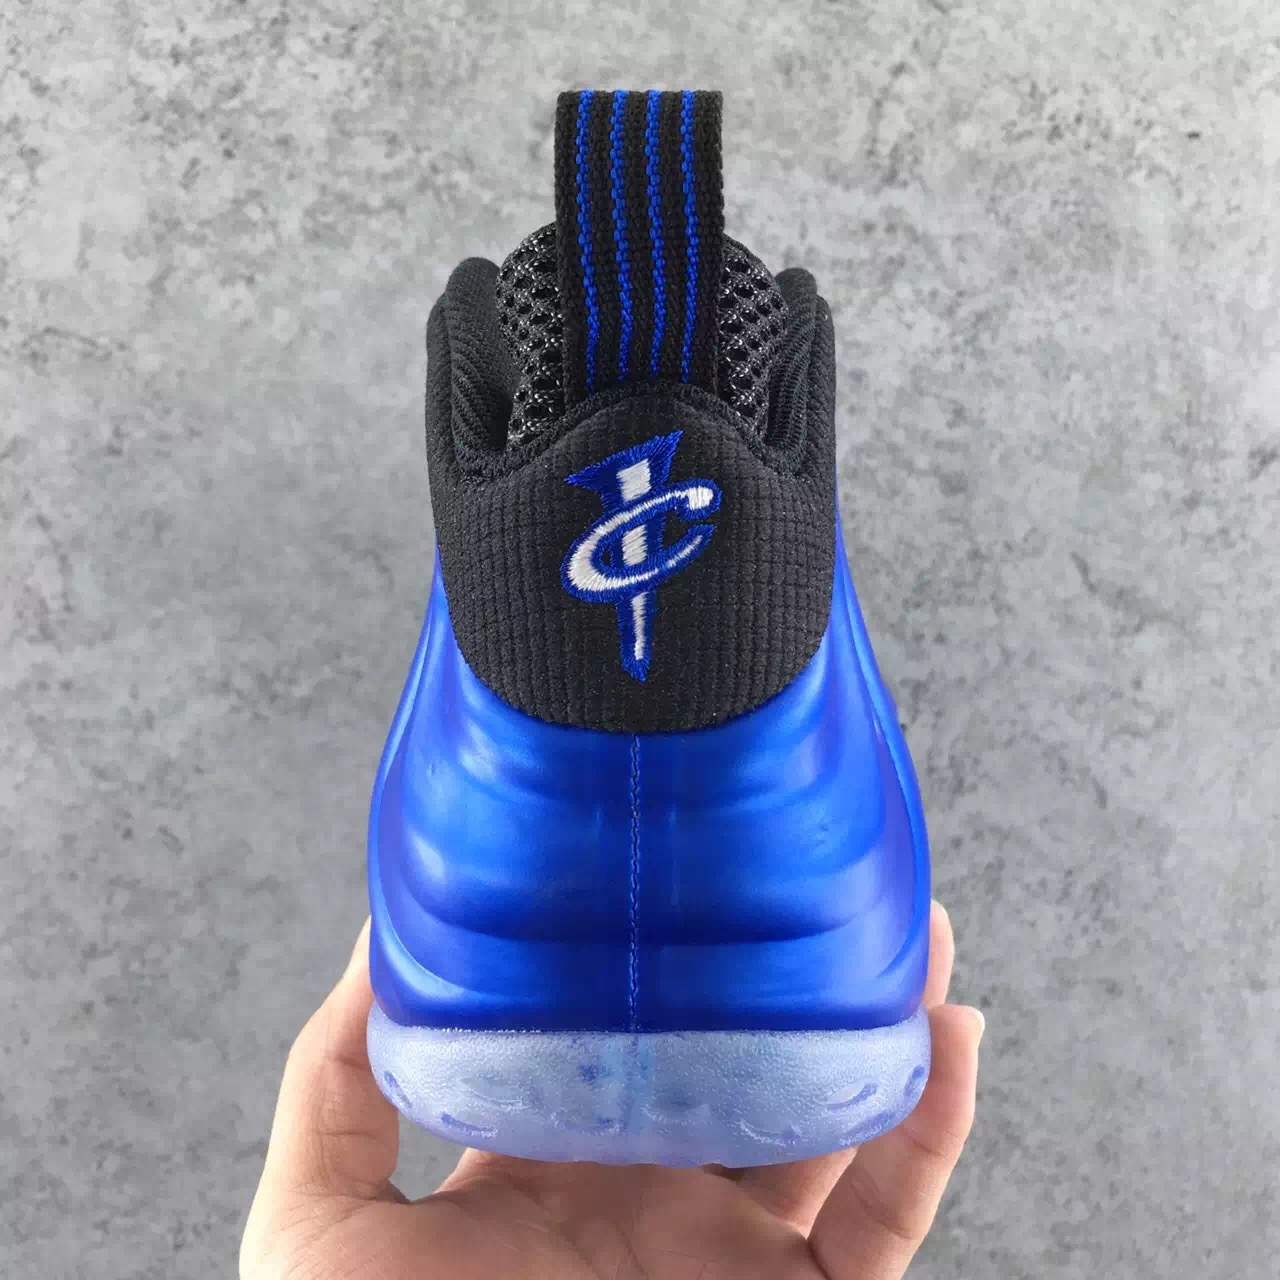 Authentic Nike Foamposite One Royal Blue